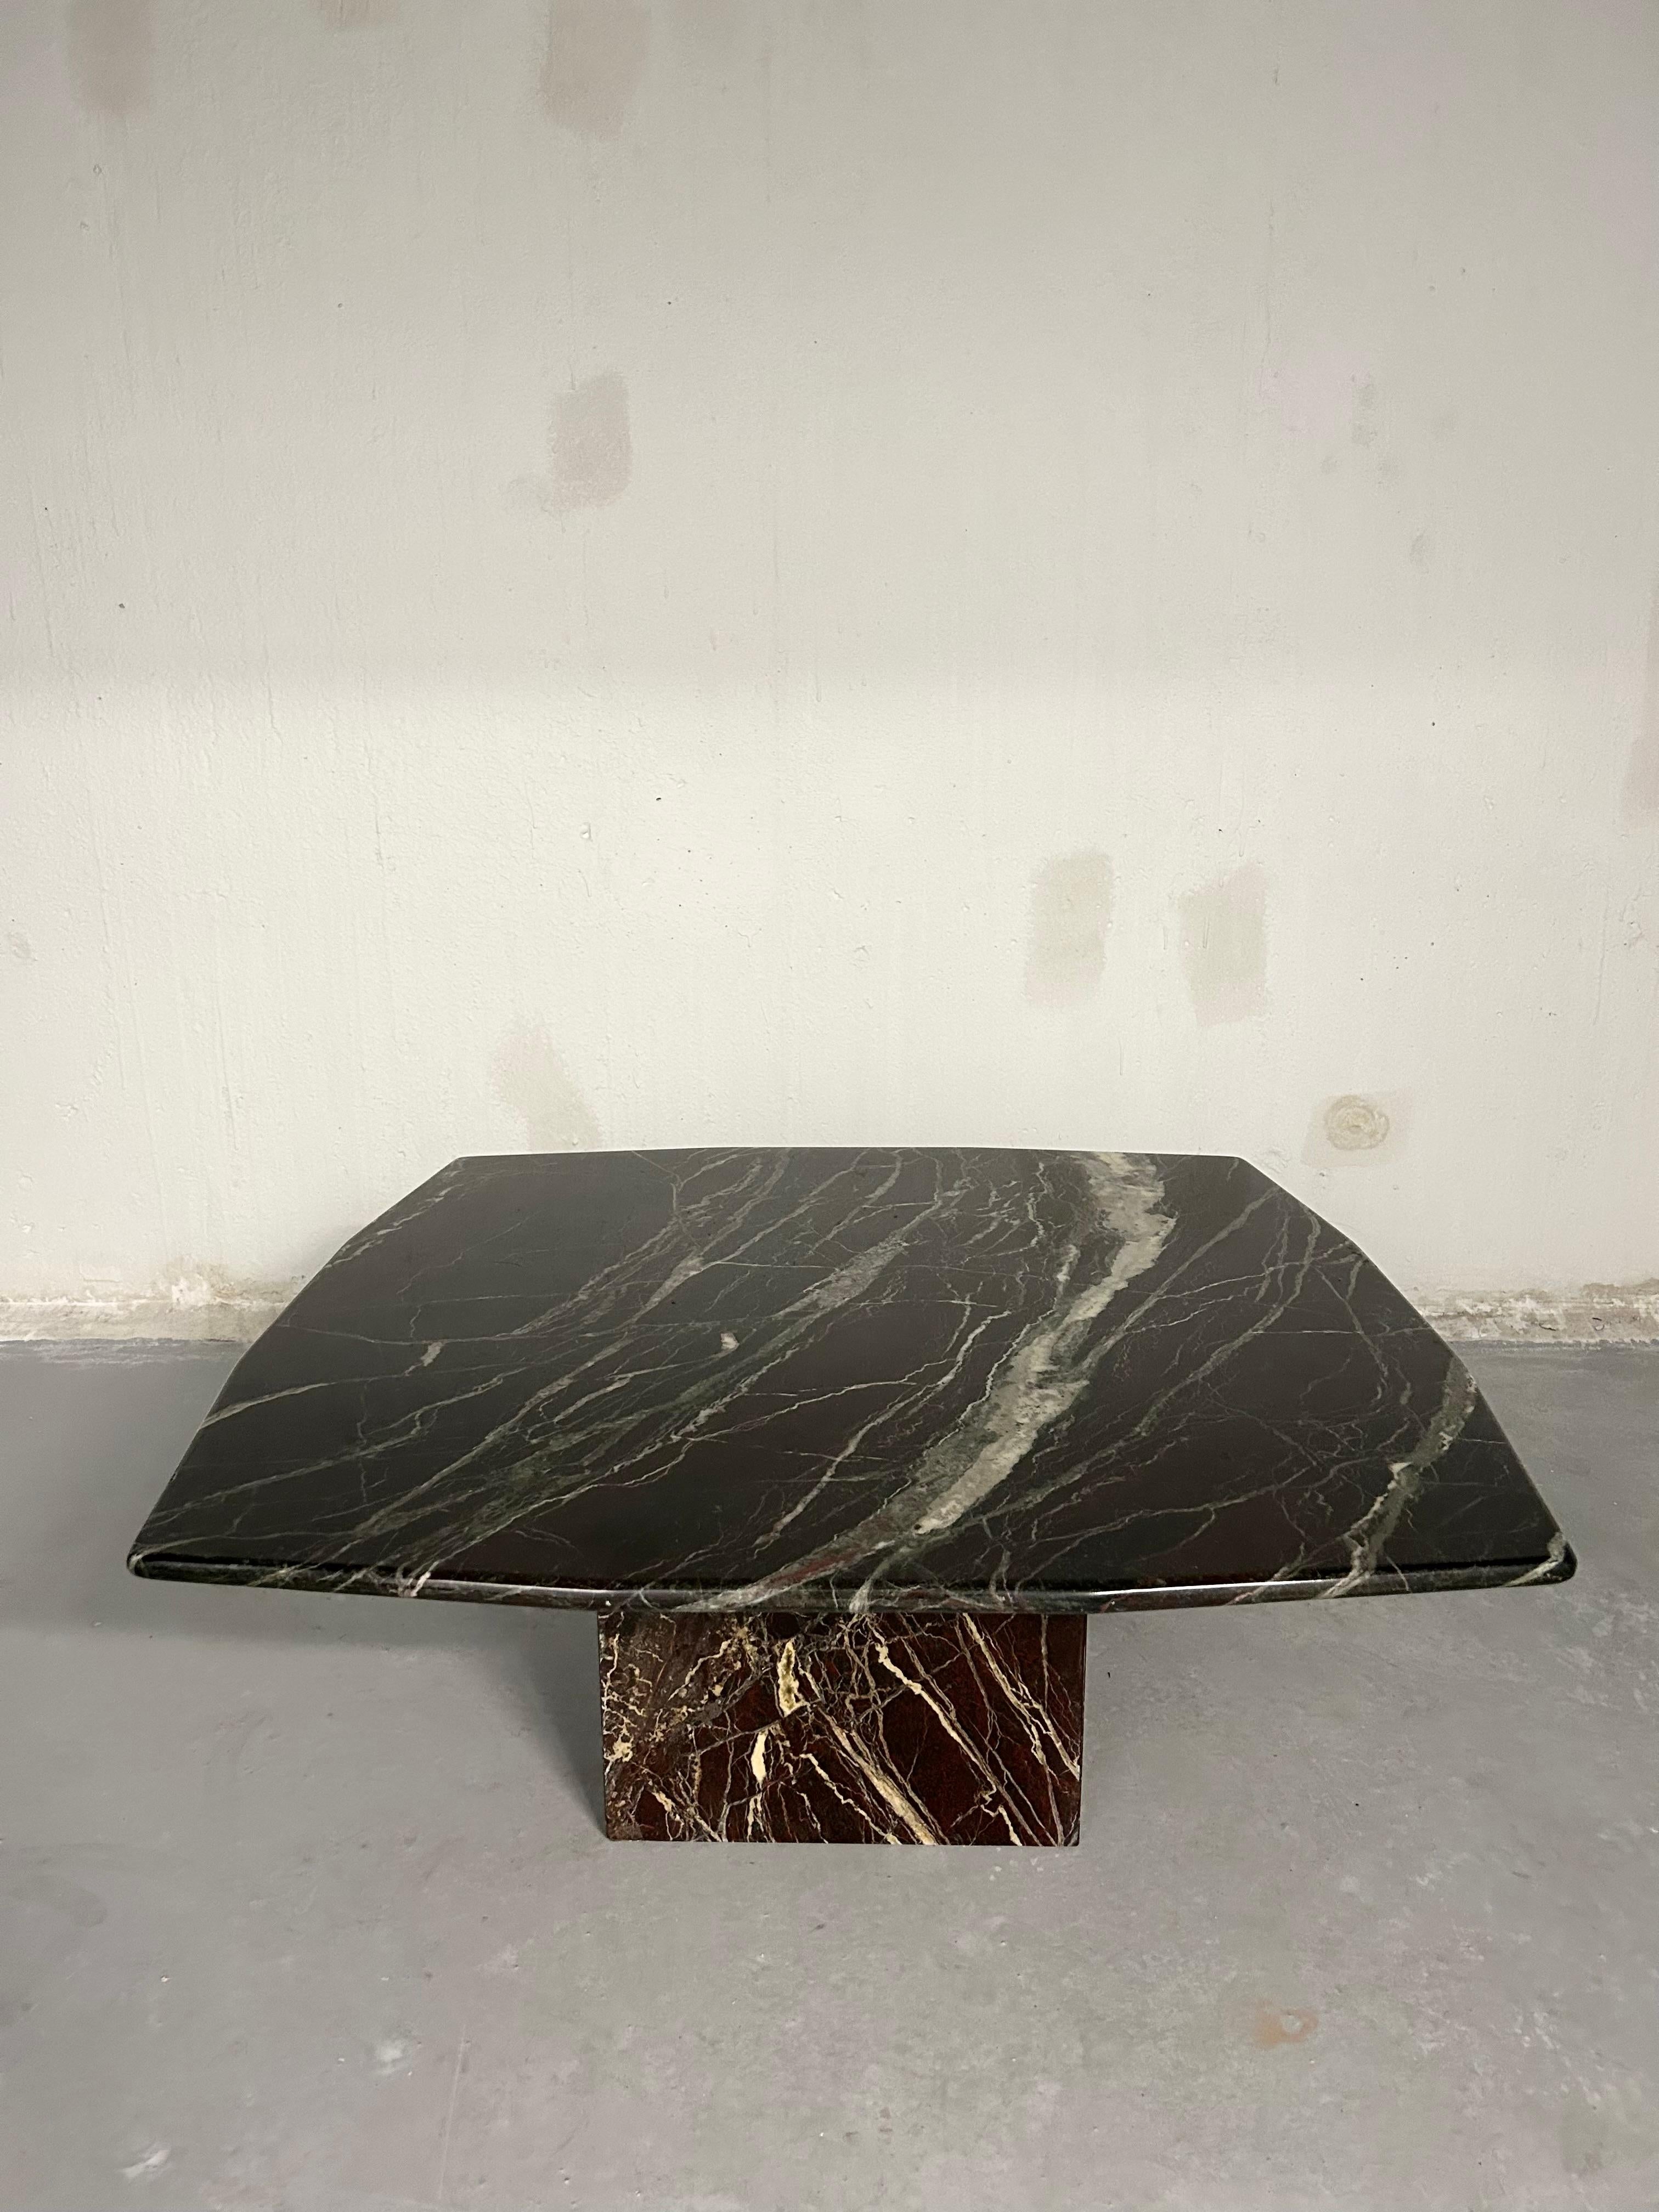 Vintage rosso levanto marble coffee table. Curved square top is separate from hollow square base. No chips or cracks. Normal surface wear from age.